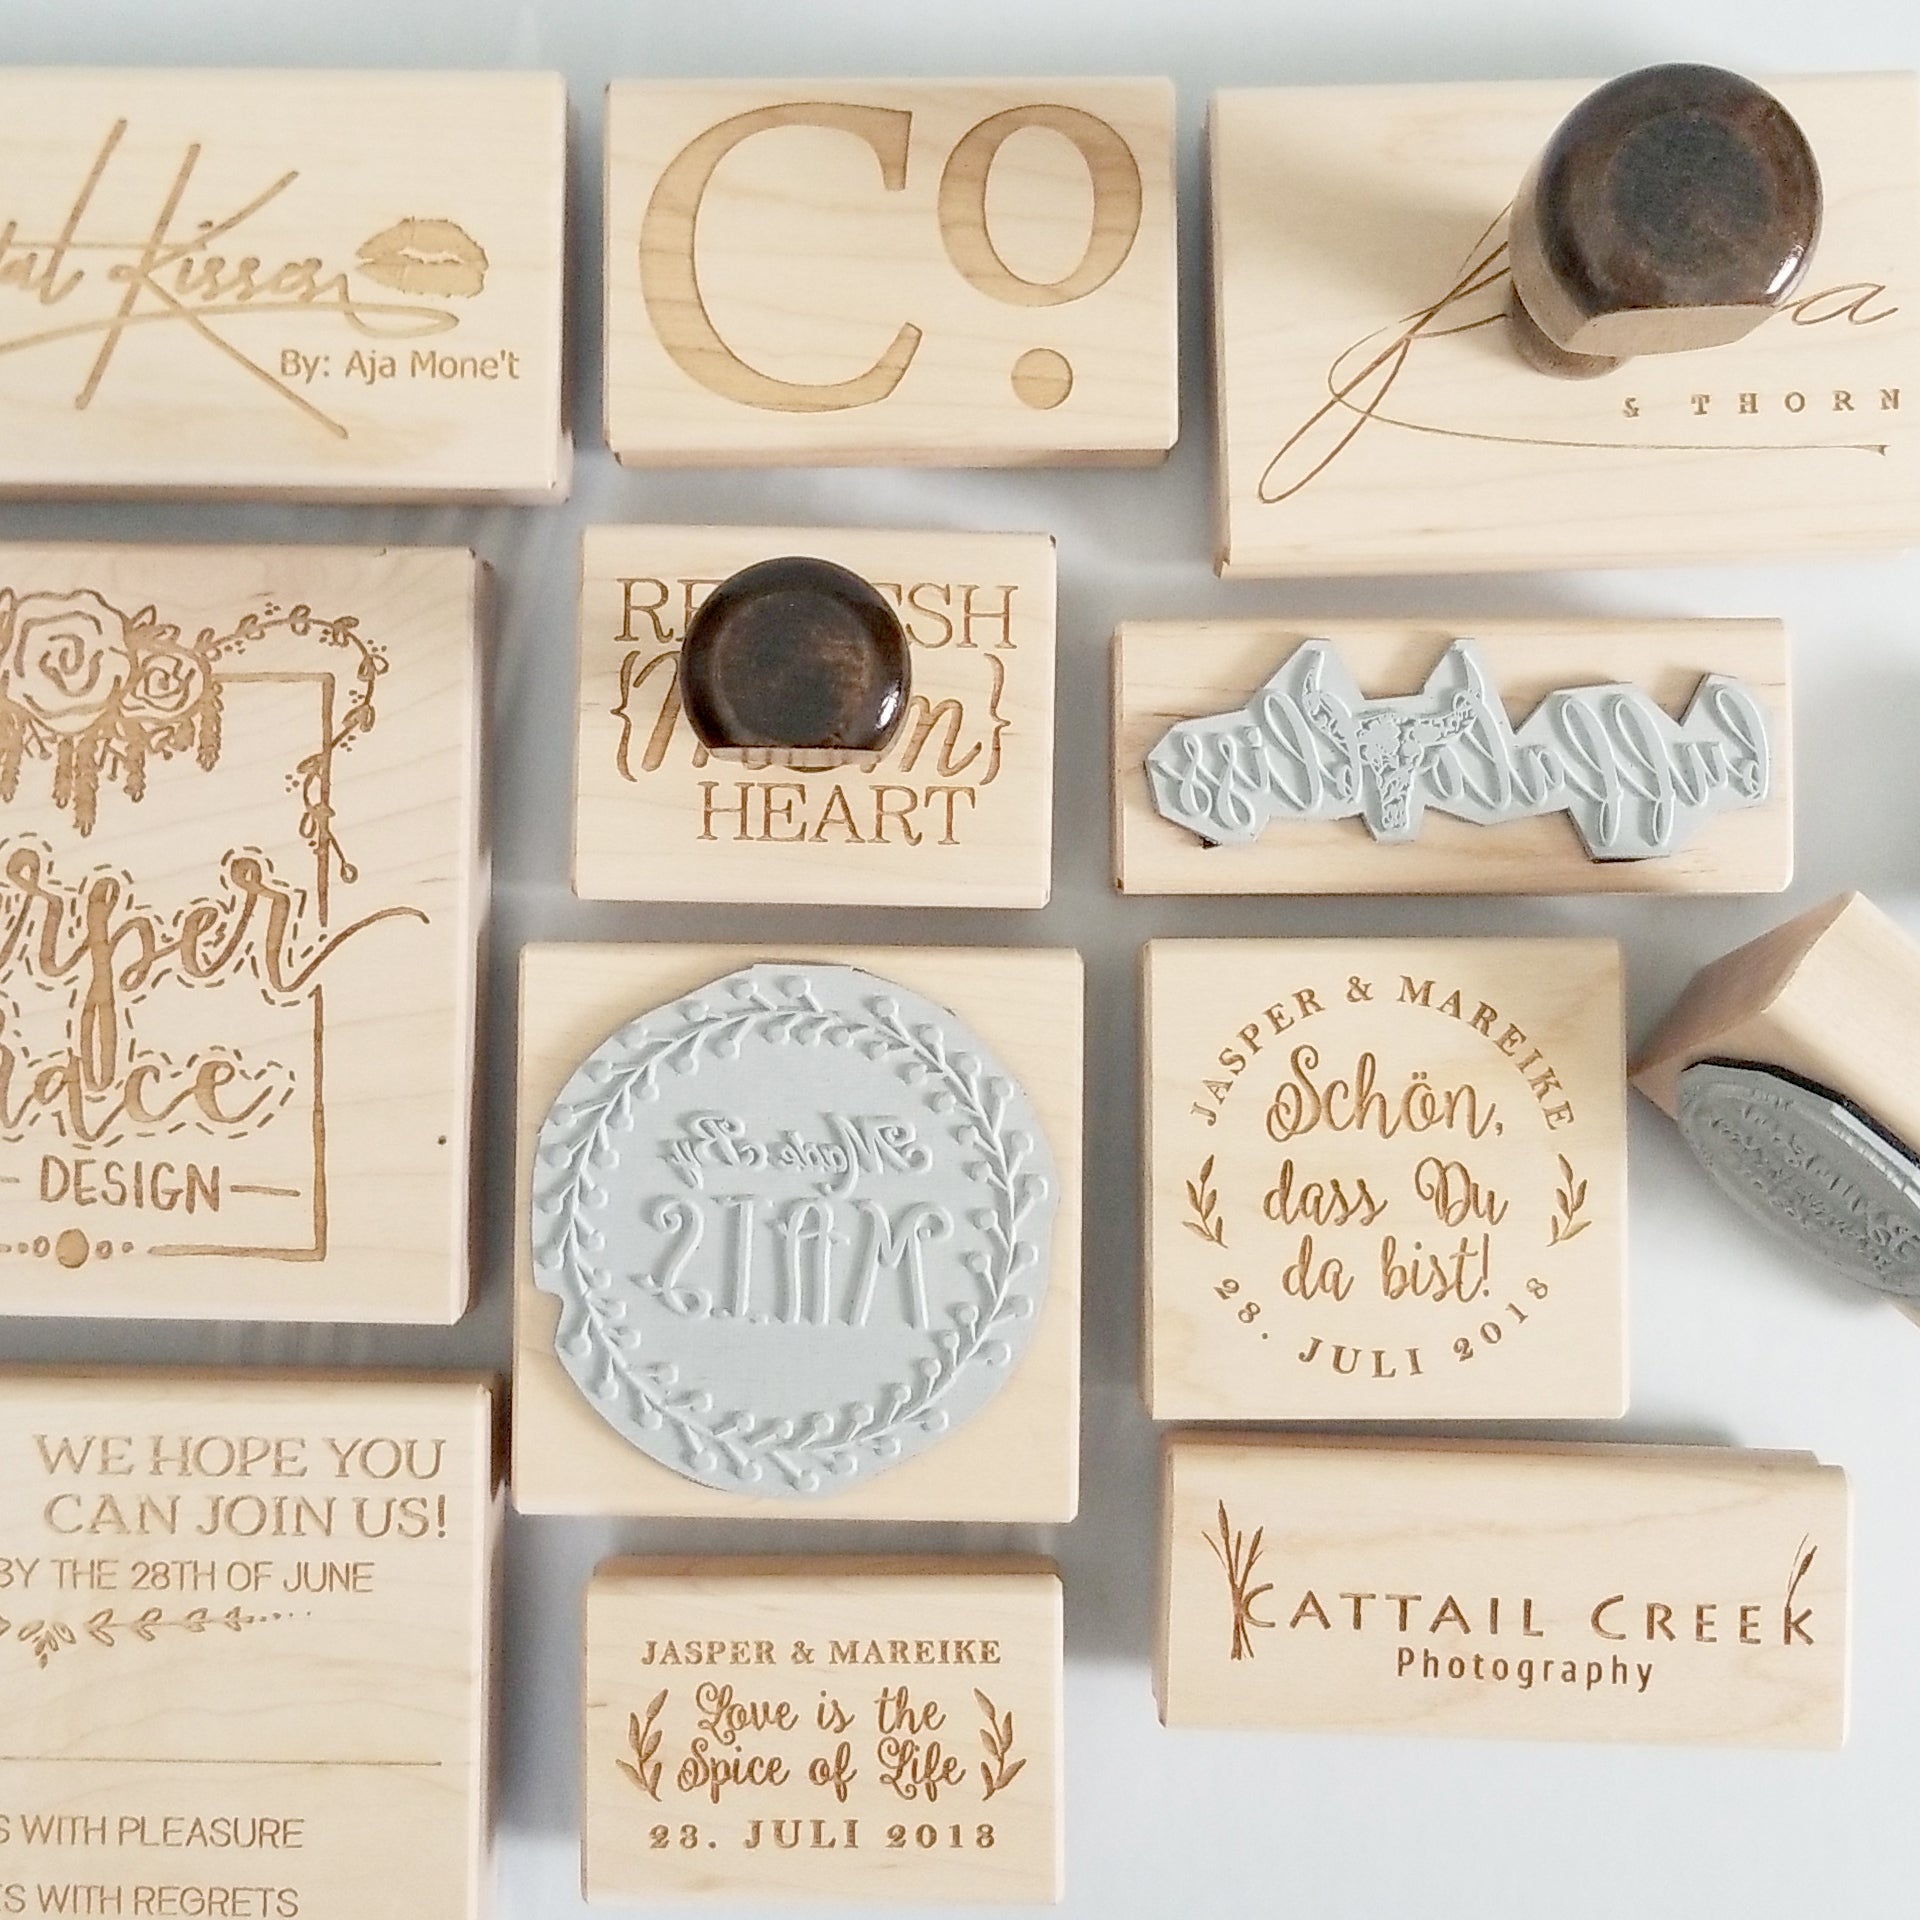 Creative custom rubber stamp In An Assortment Of Designs 